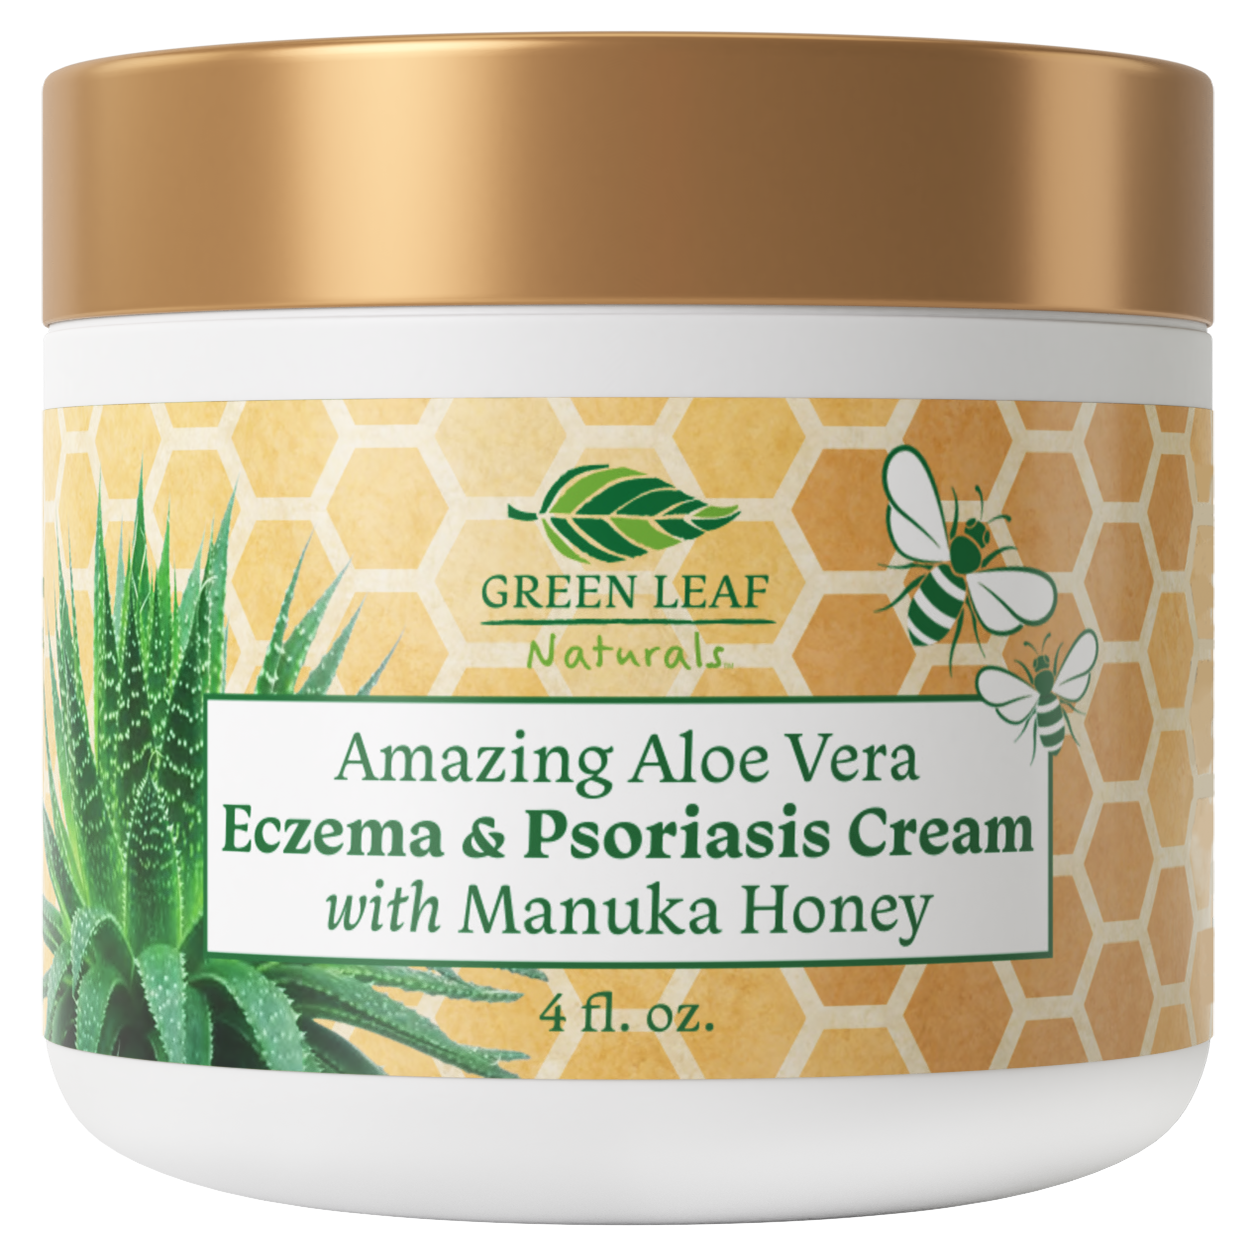 Aloe Vera Eczema Cream | Psoriasis Cream with Manuka Honey New Zealand - Soothing Natural Relief for Dry Itchy Flaky Scalp, Skin Rash, Redness, Rosacea, Acne, Dandruff - 4oz - by Green Leaf Naturals Vanilla 4 Ounce (Pack of 1)